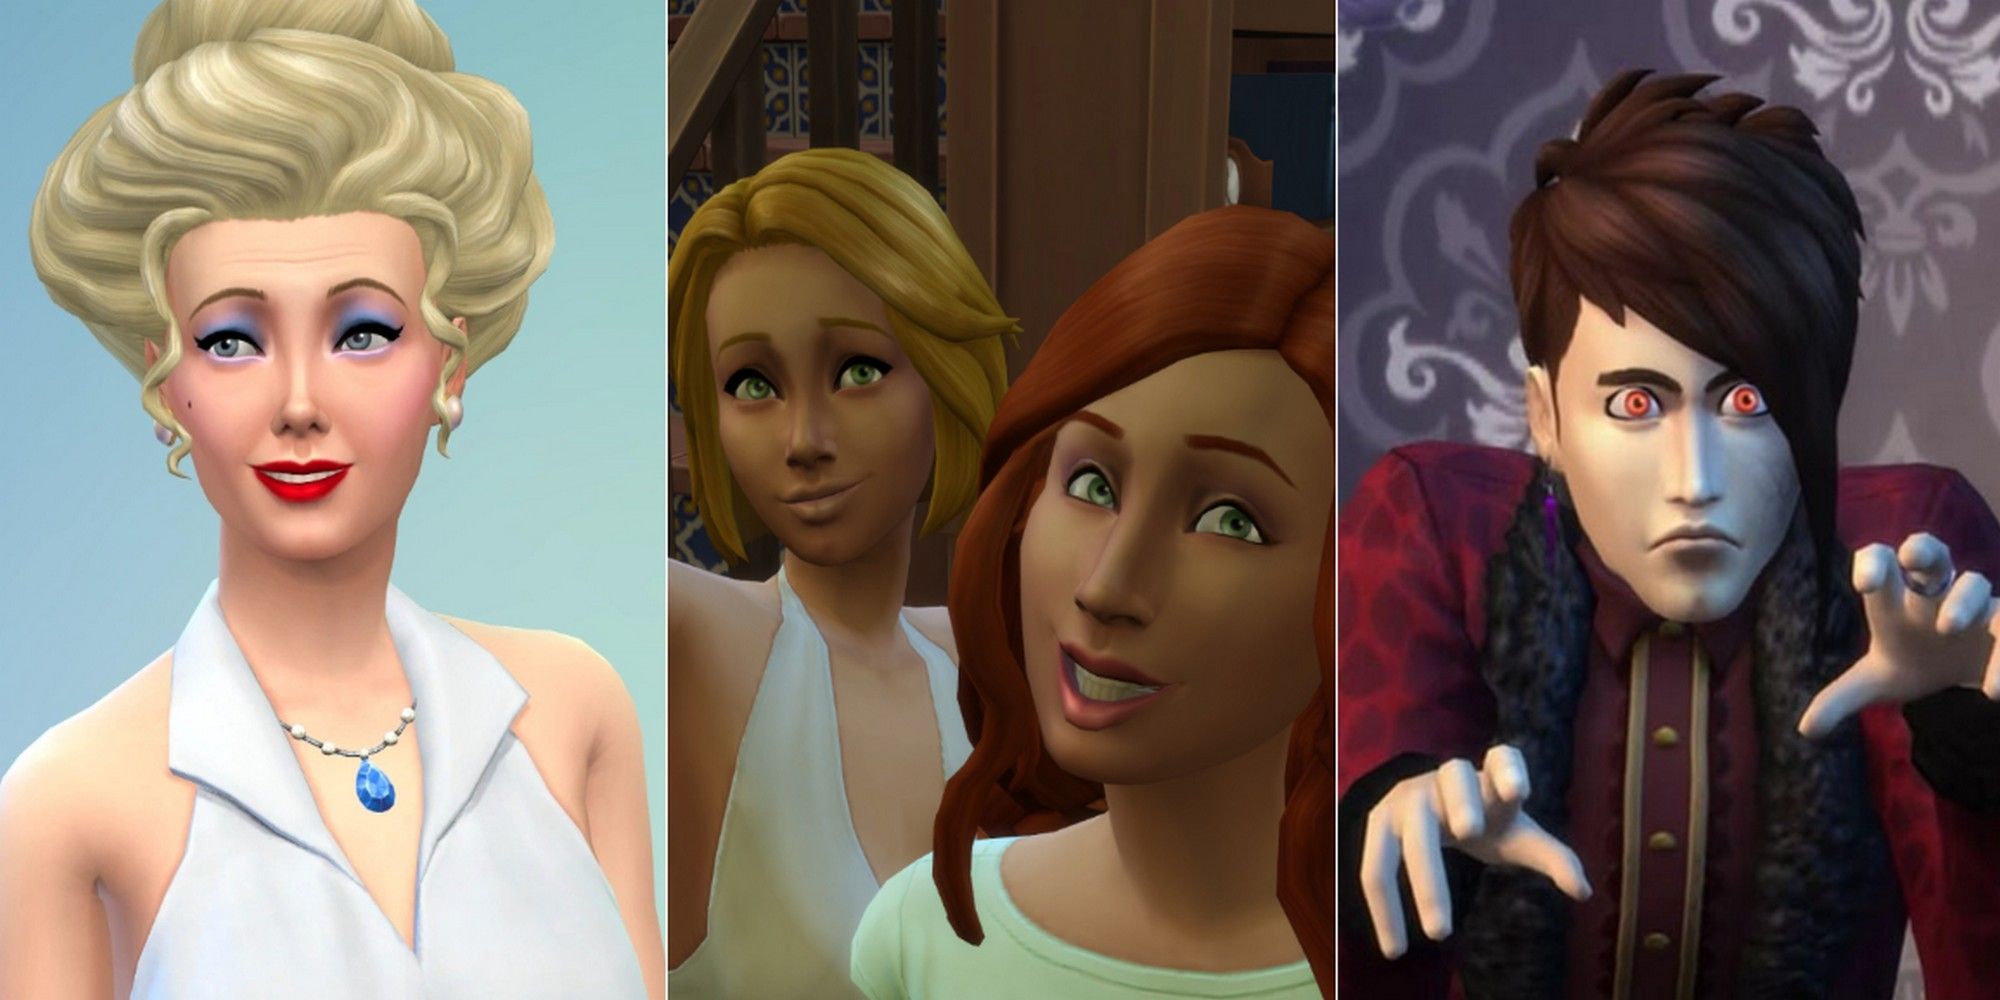 Judith Ward, the Calientes, and Caleb Vattore from The Sims 4